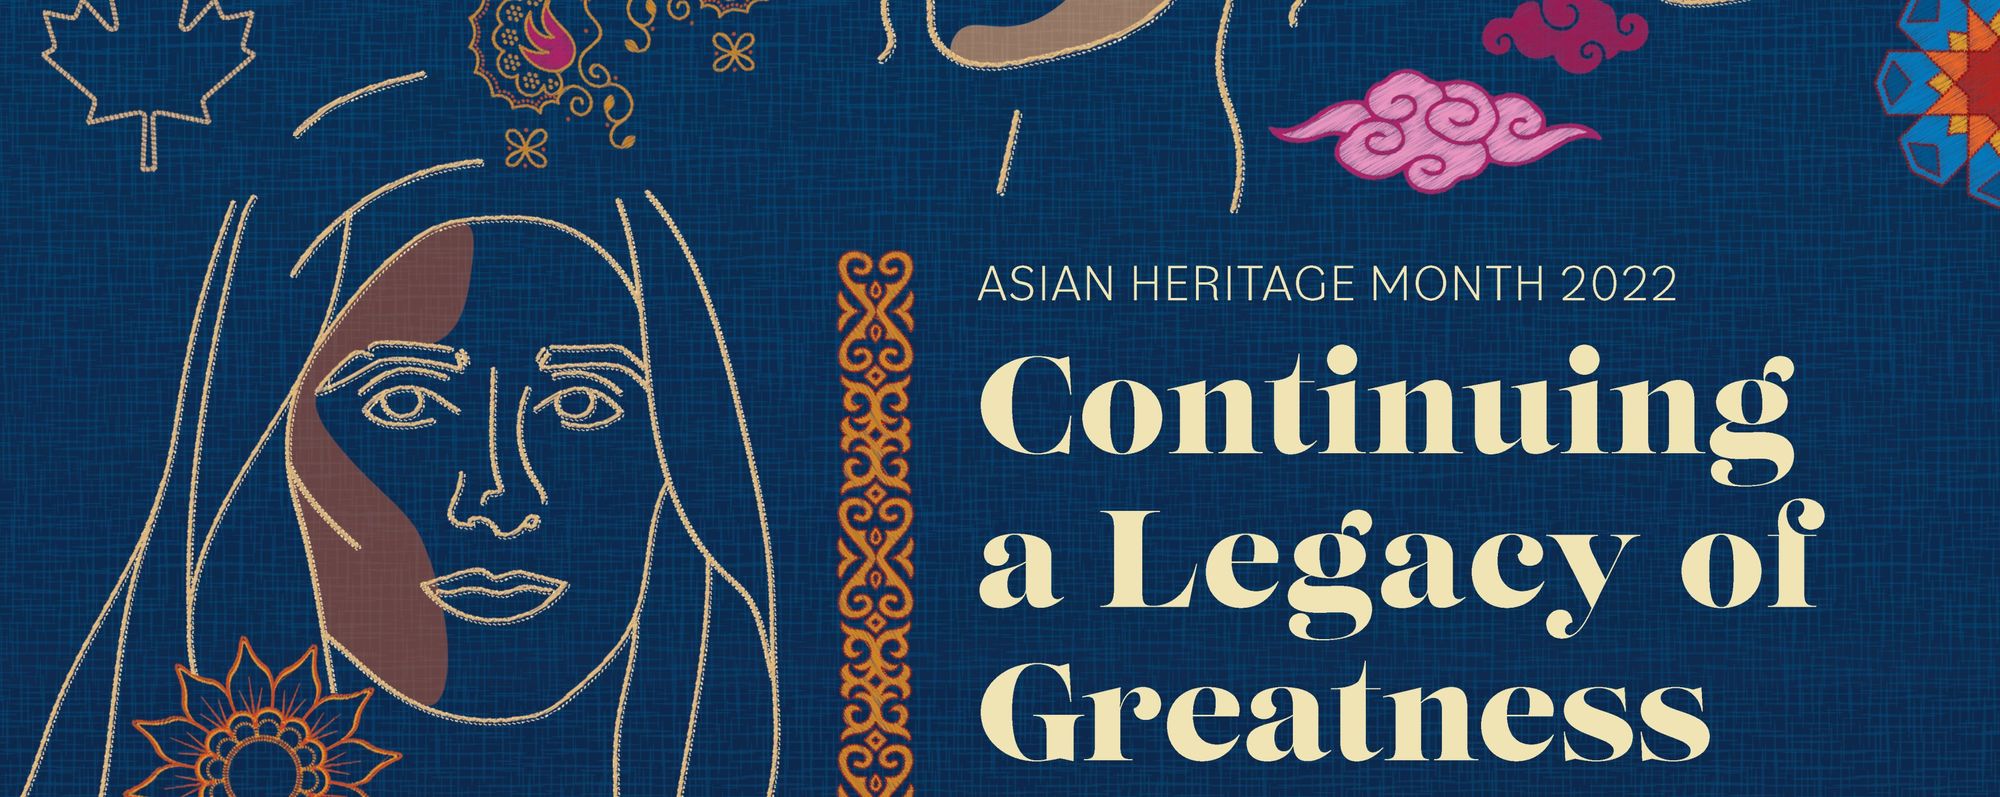 20 Asian Heritage Month Trivia